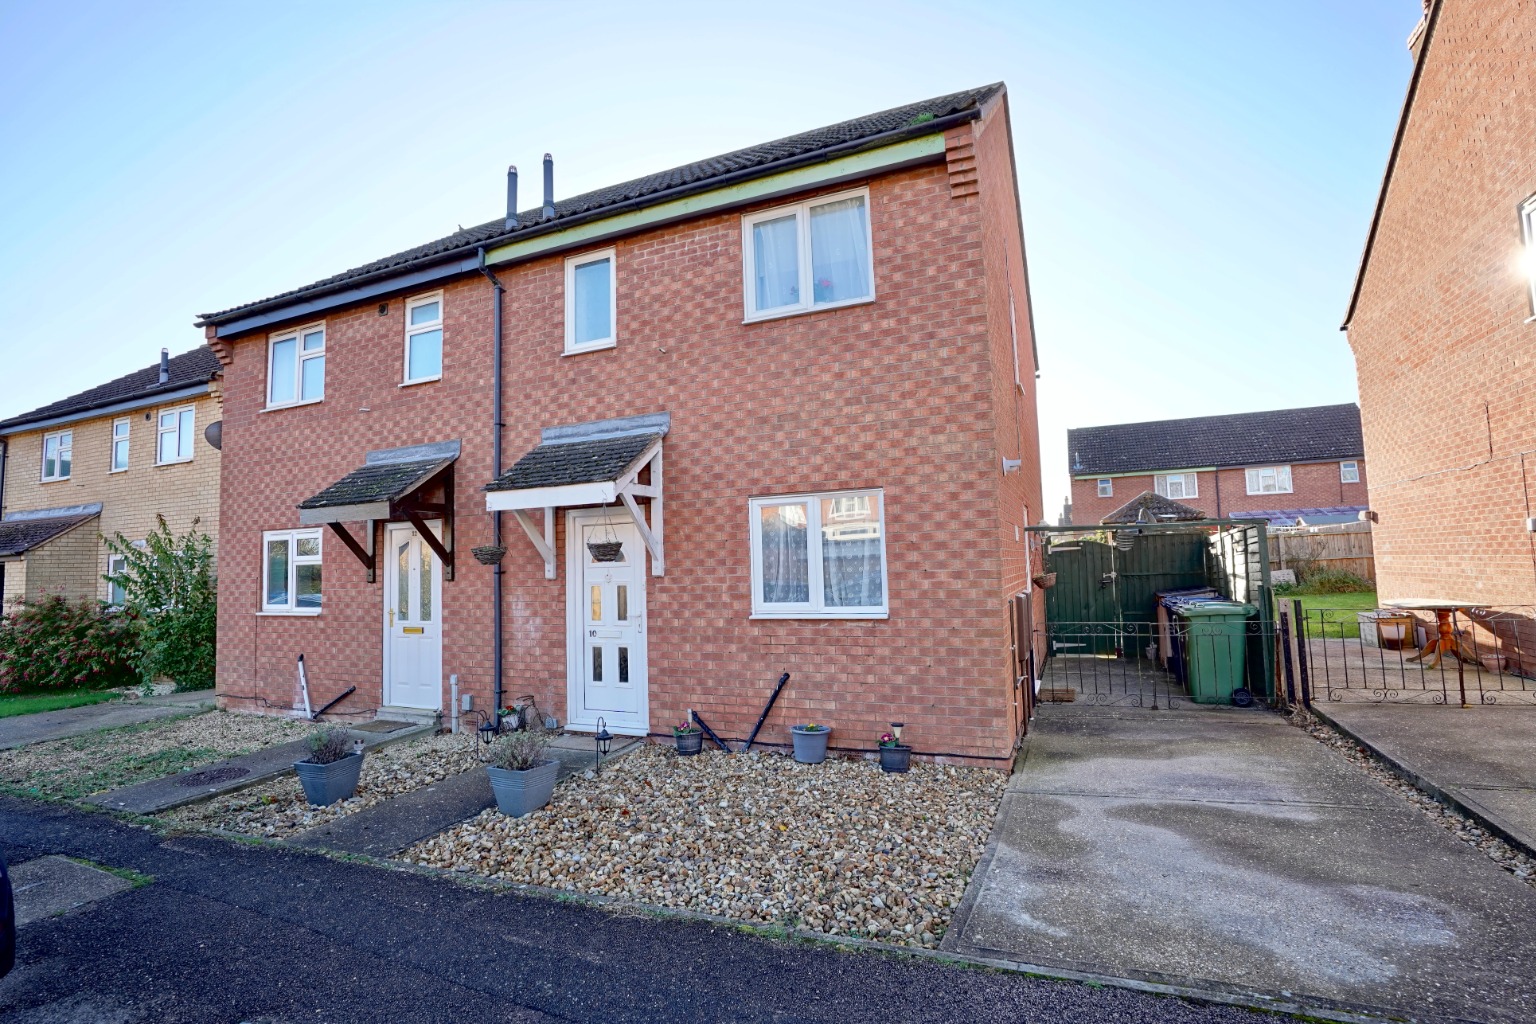 2 bed semi-detached house for sale in Stoney Close, Huntingdon - Property Image 1